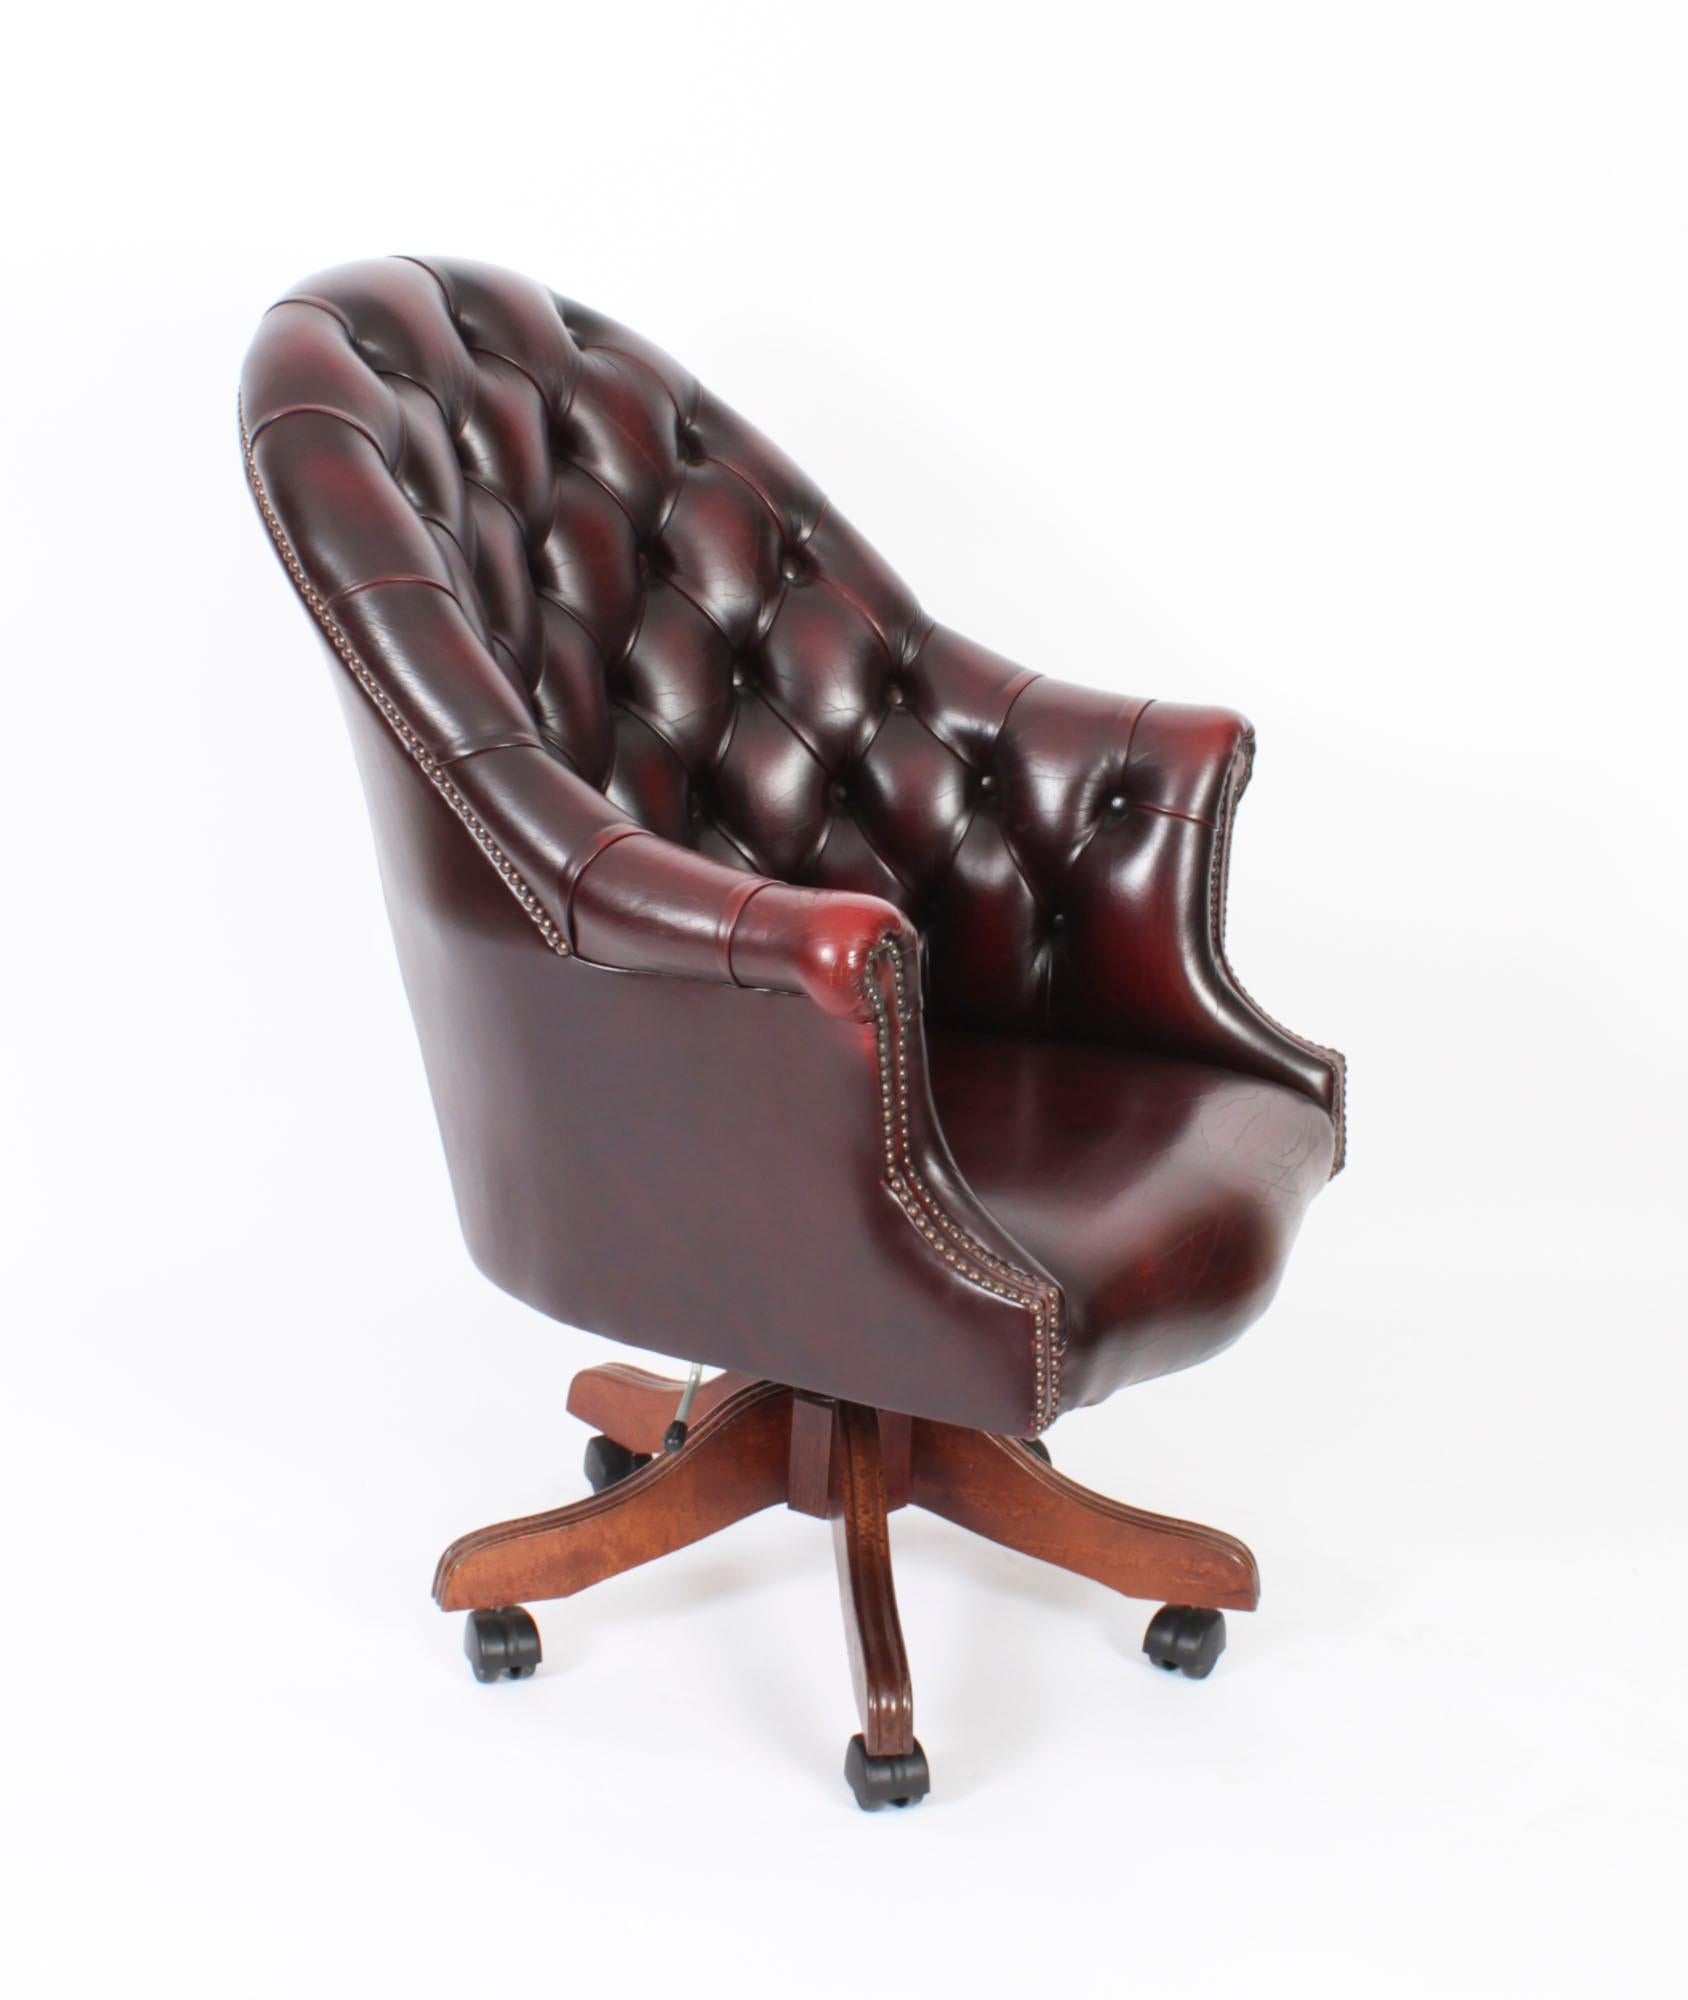 Vintage English Hand Made Leather Directors Desk Chair 20th Century For Sale 8